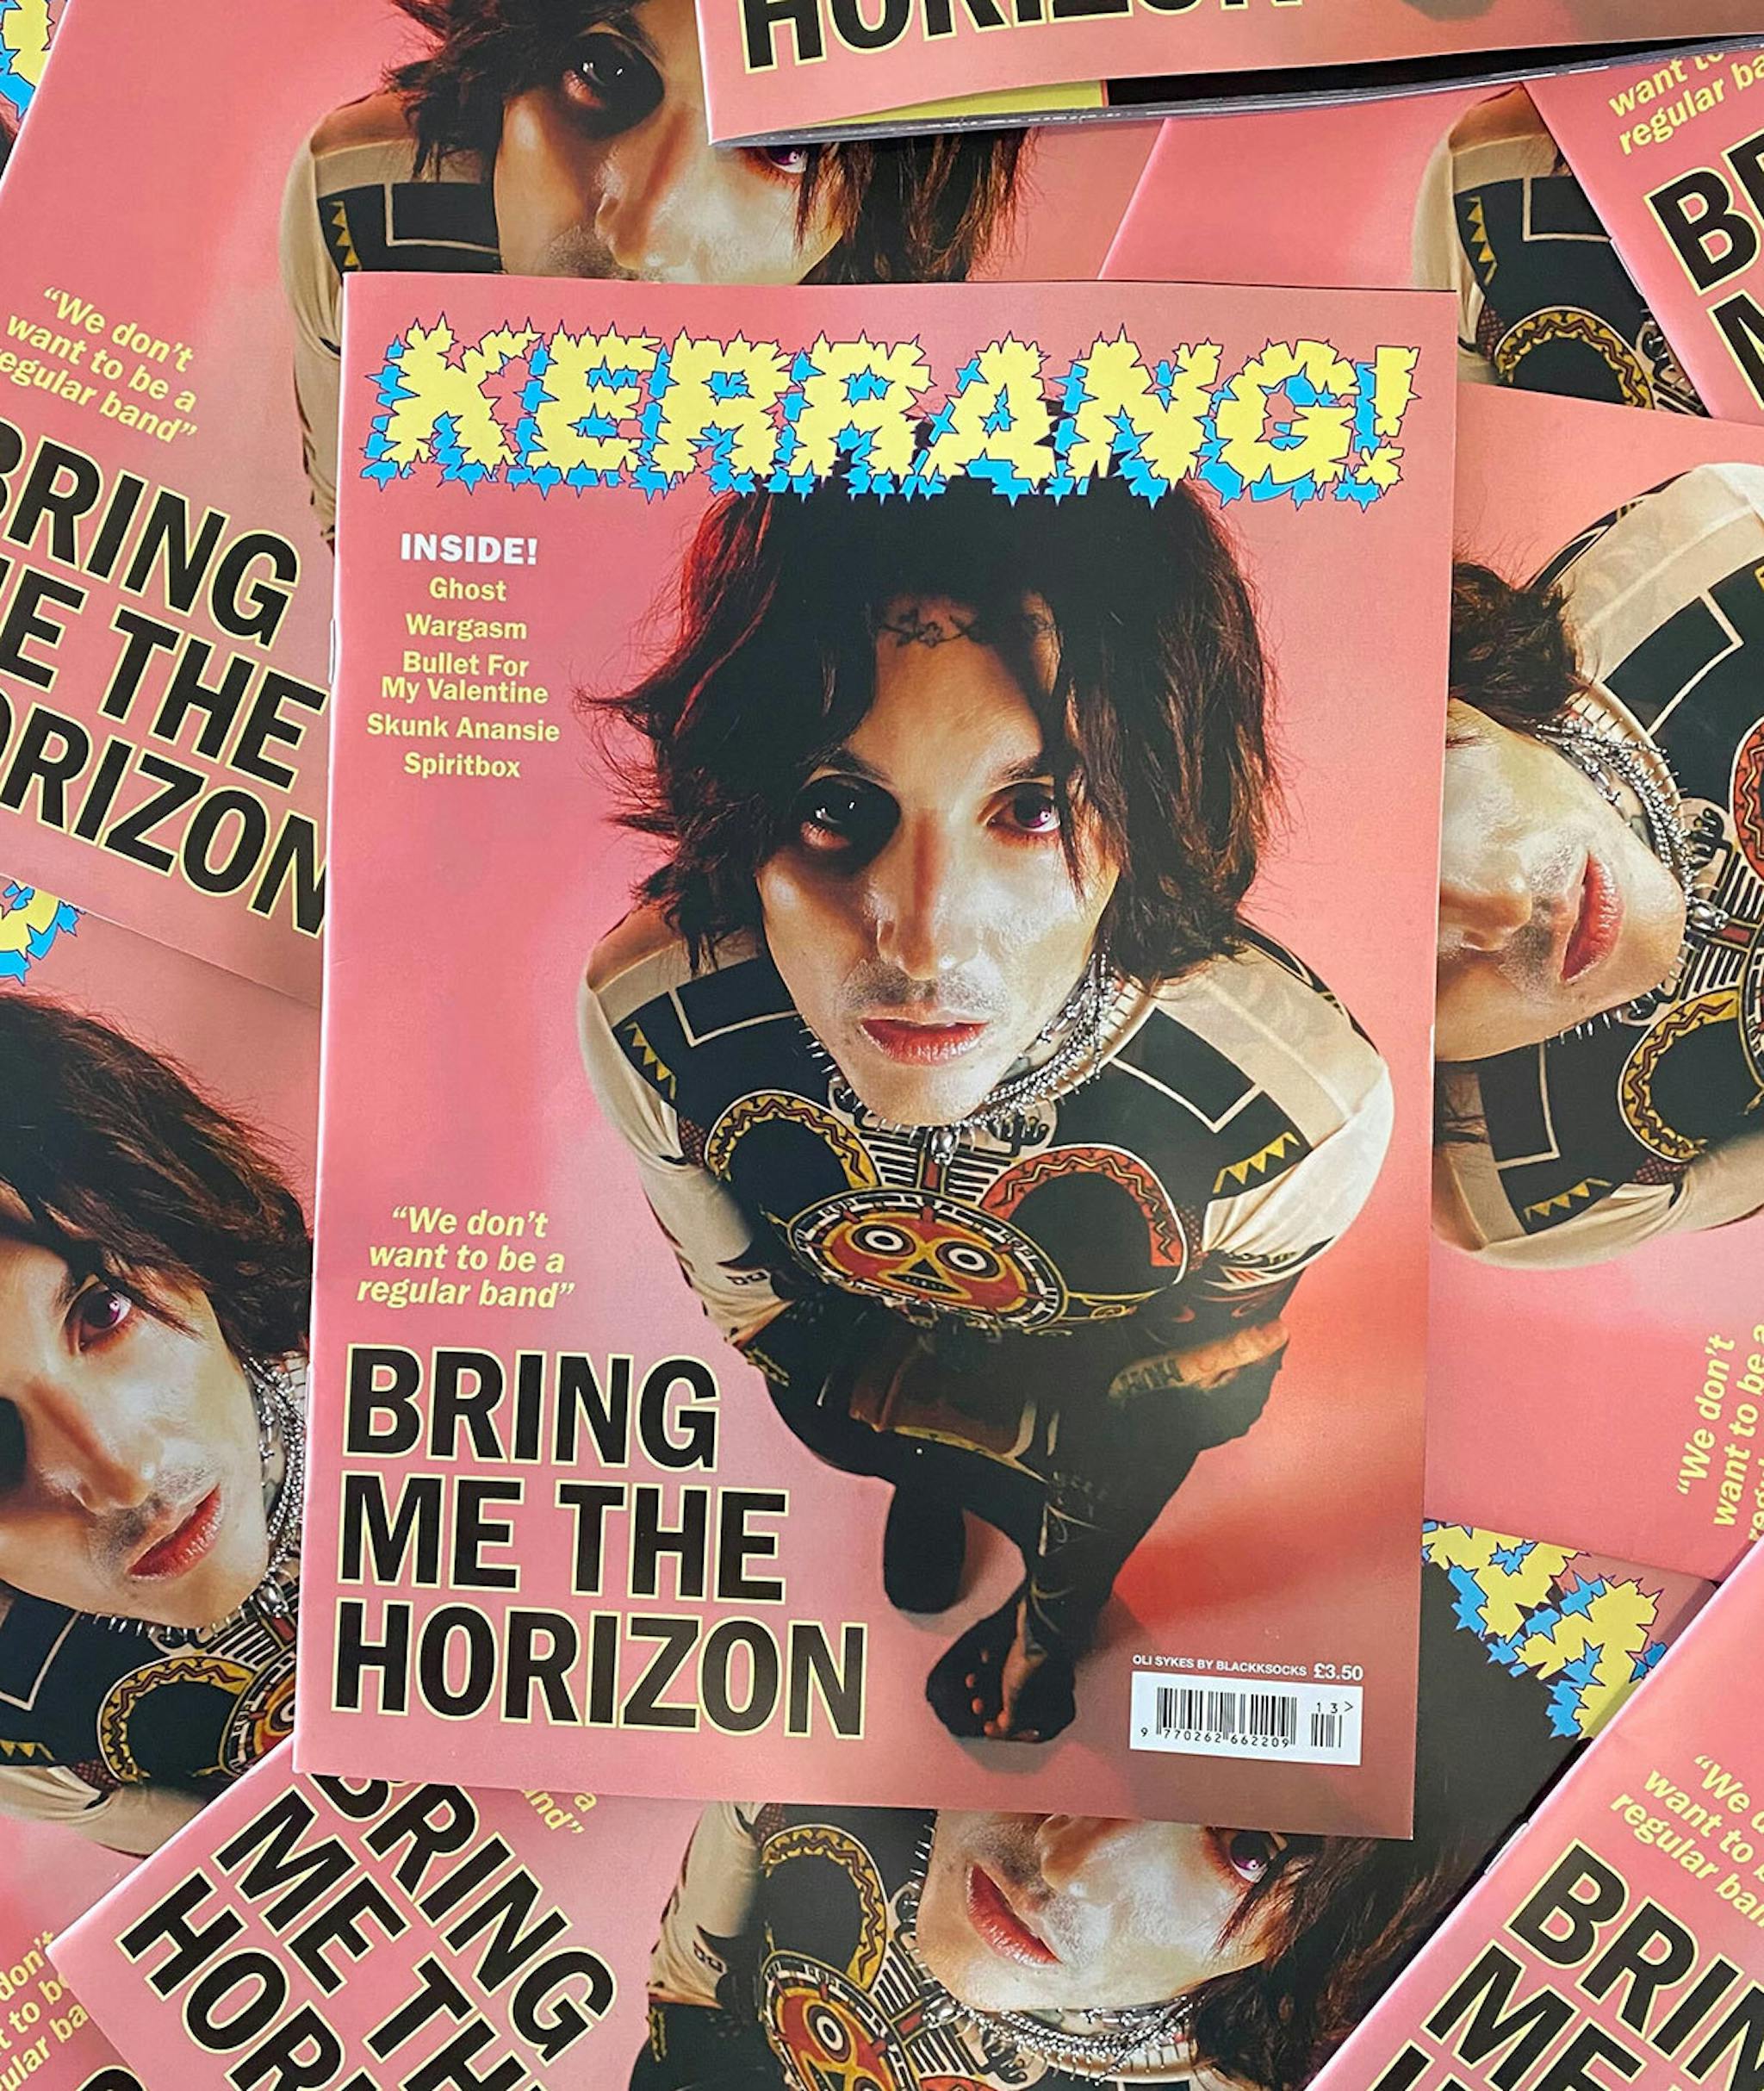 Bring Me The Horizon on the cover of Kerrang! magazine